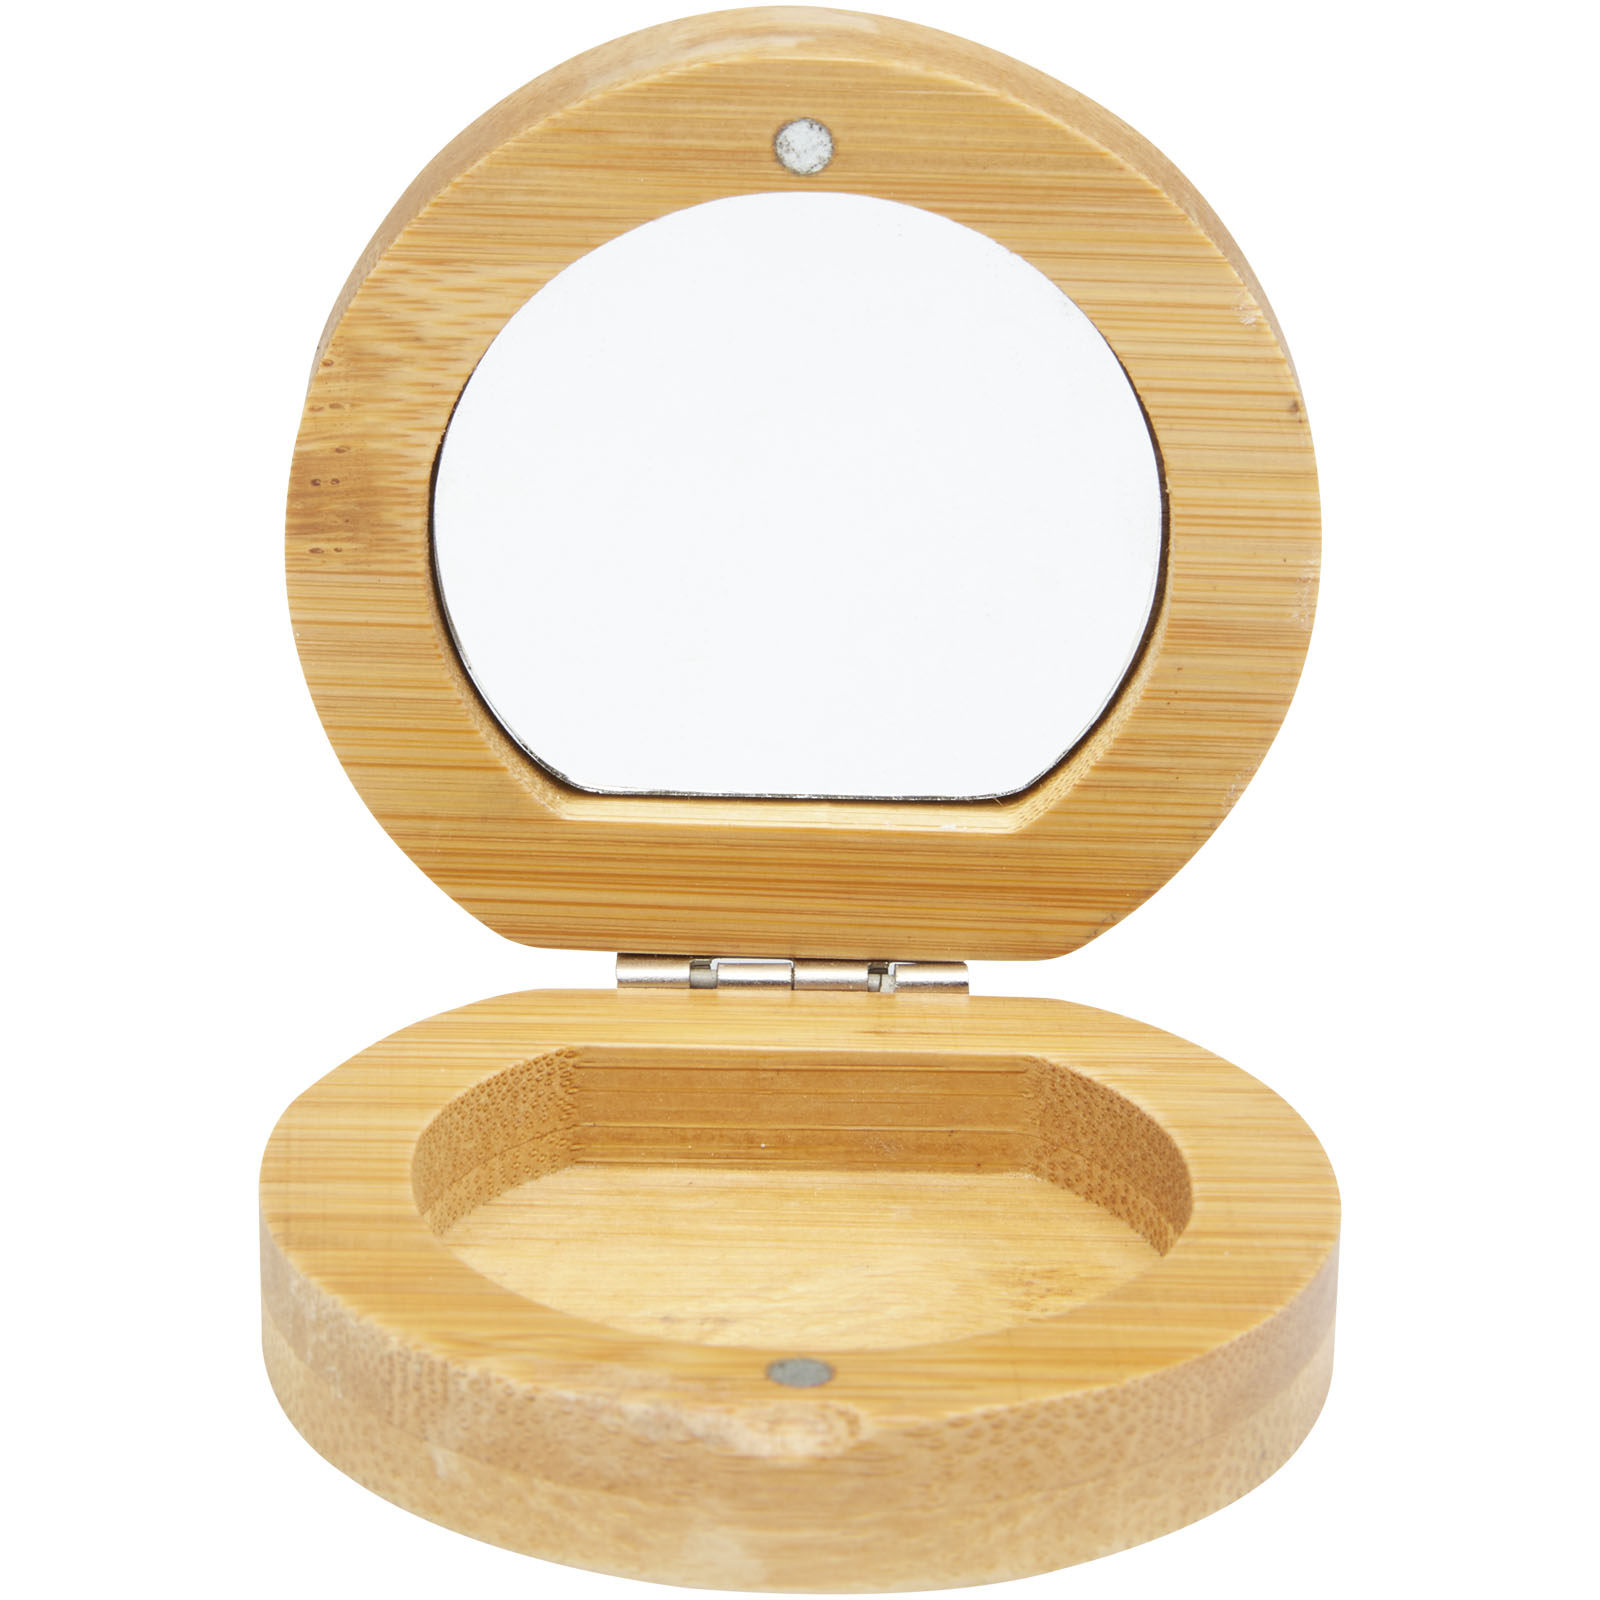 Advertising Personal Care - Afrodit bamboo pocket mirror - 3